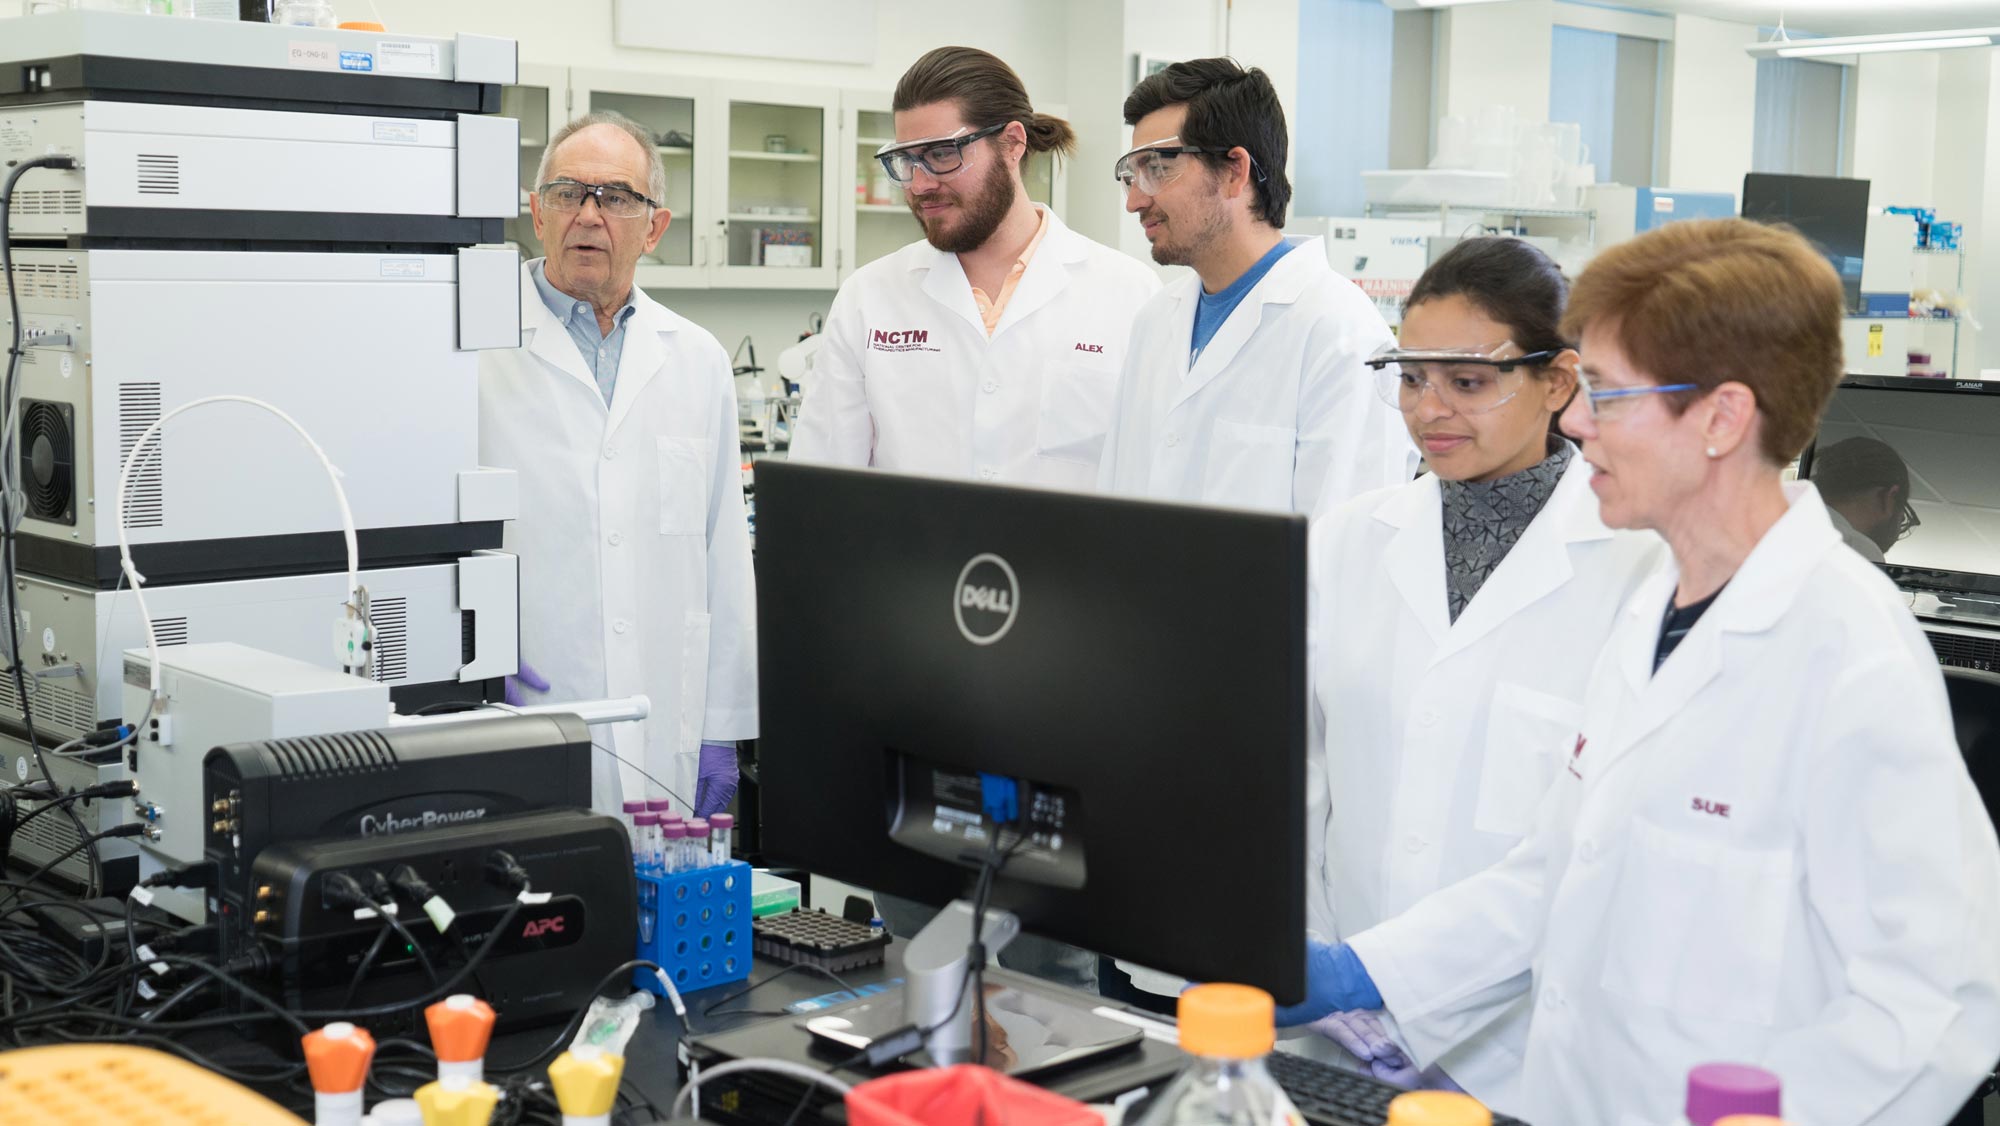 Five researchers in a lab, three male and two female, observe lab equipment and a computer monitor. All are wearing safety goggles and white lab coats.